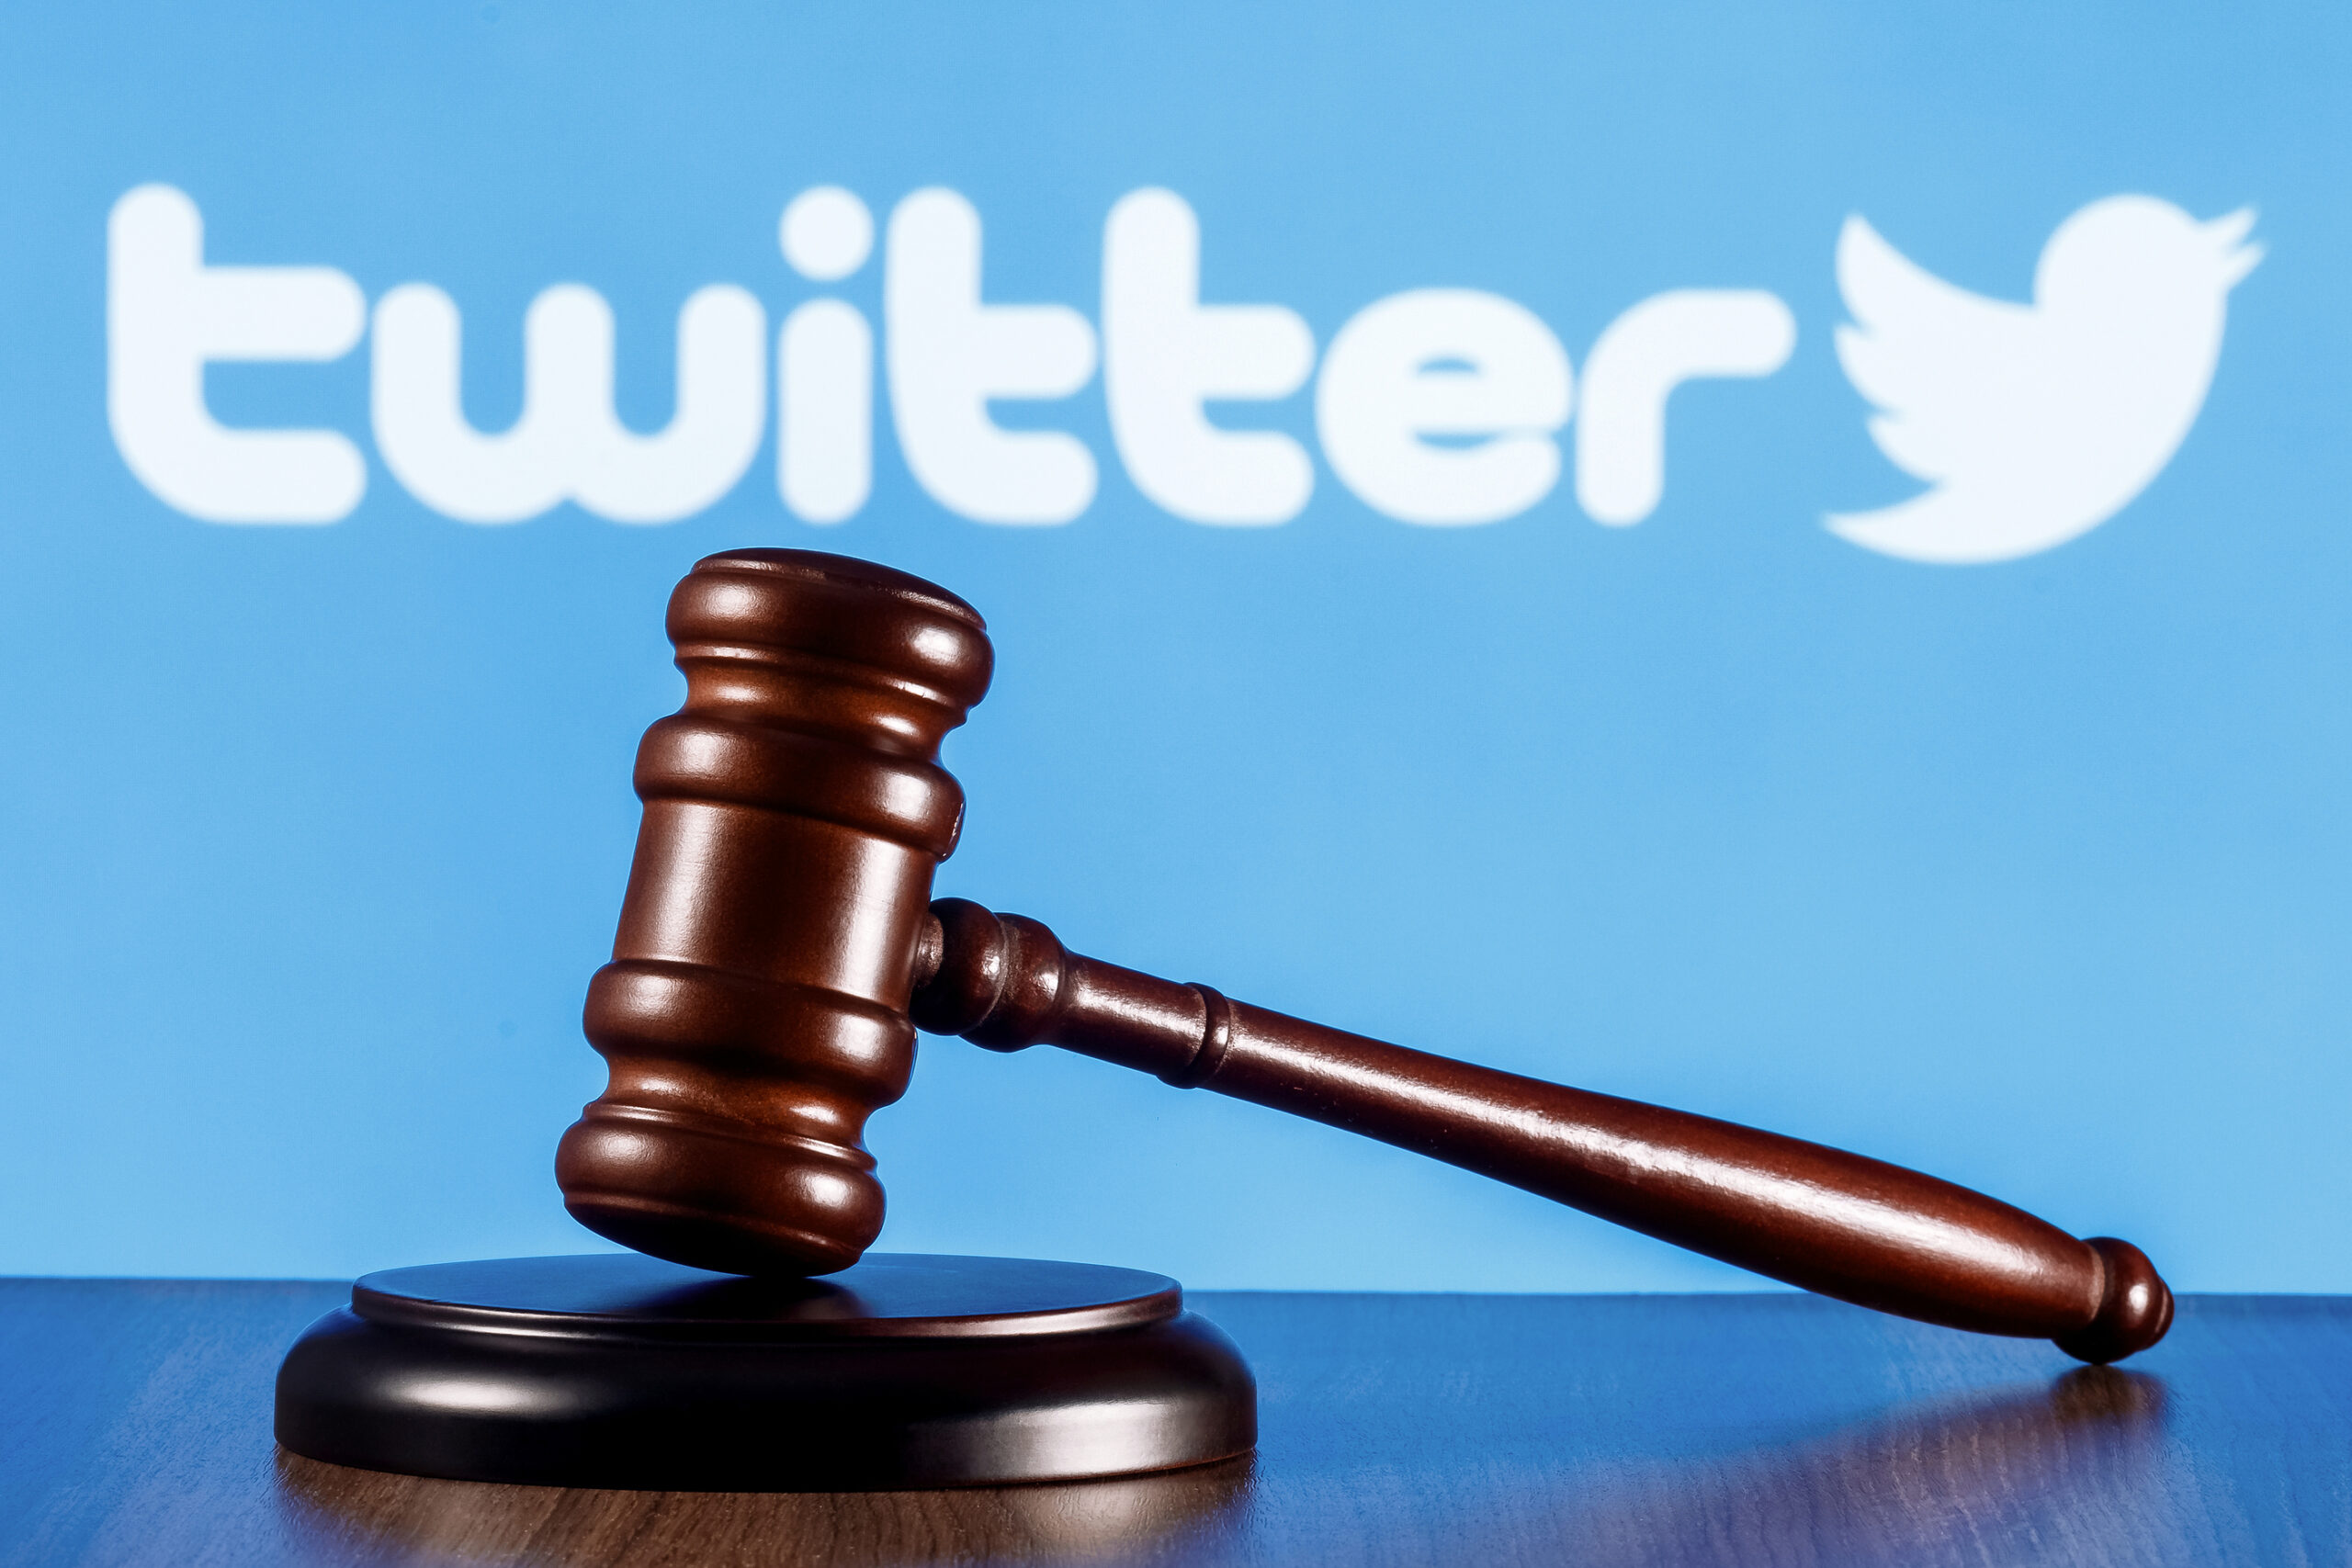 Twitter Asks Judge To Toss Out Proposed Sex Bias Class Action